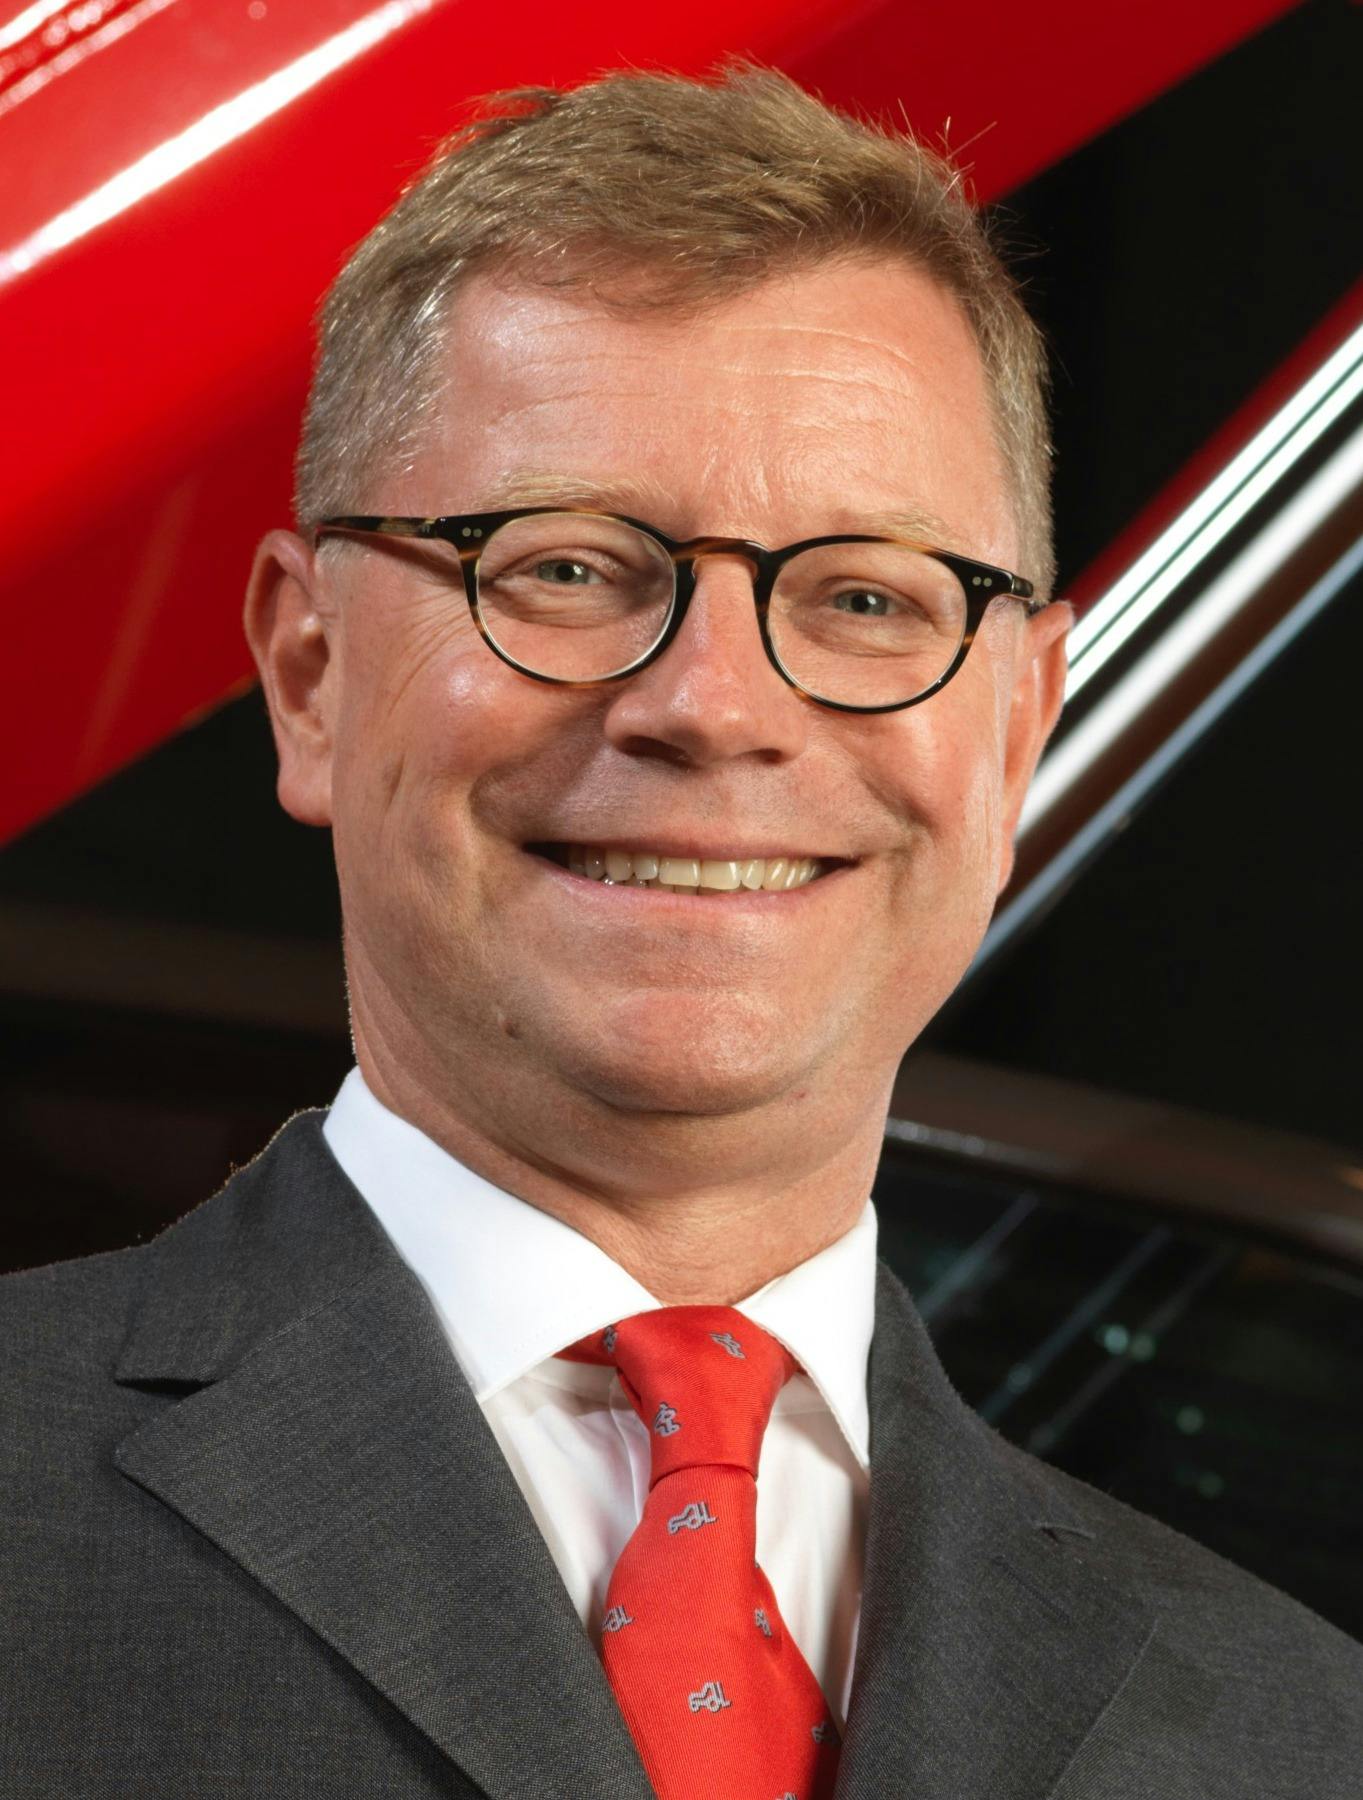 Manitou Names New Executive VP of Global Sales and Marketing | Construction News